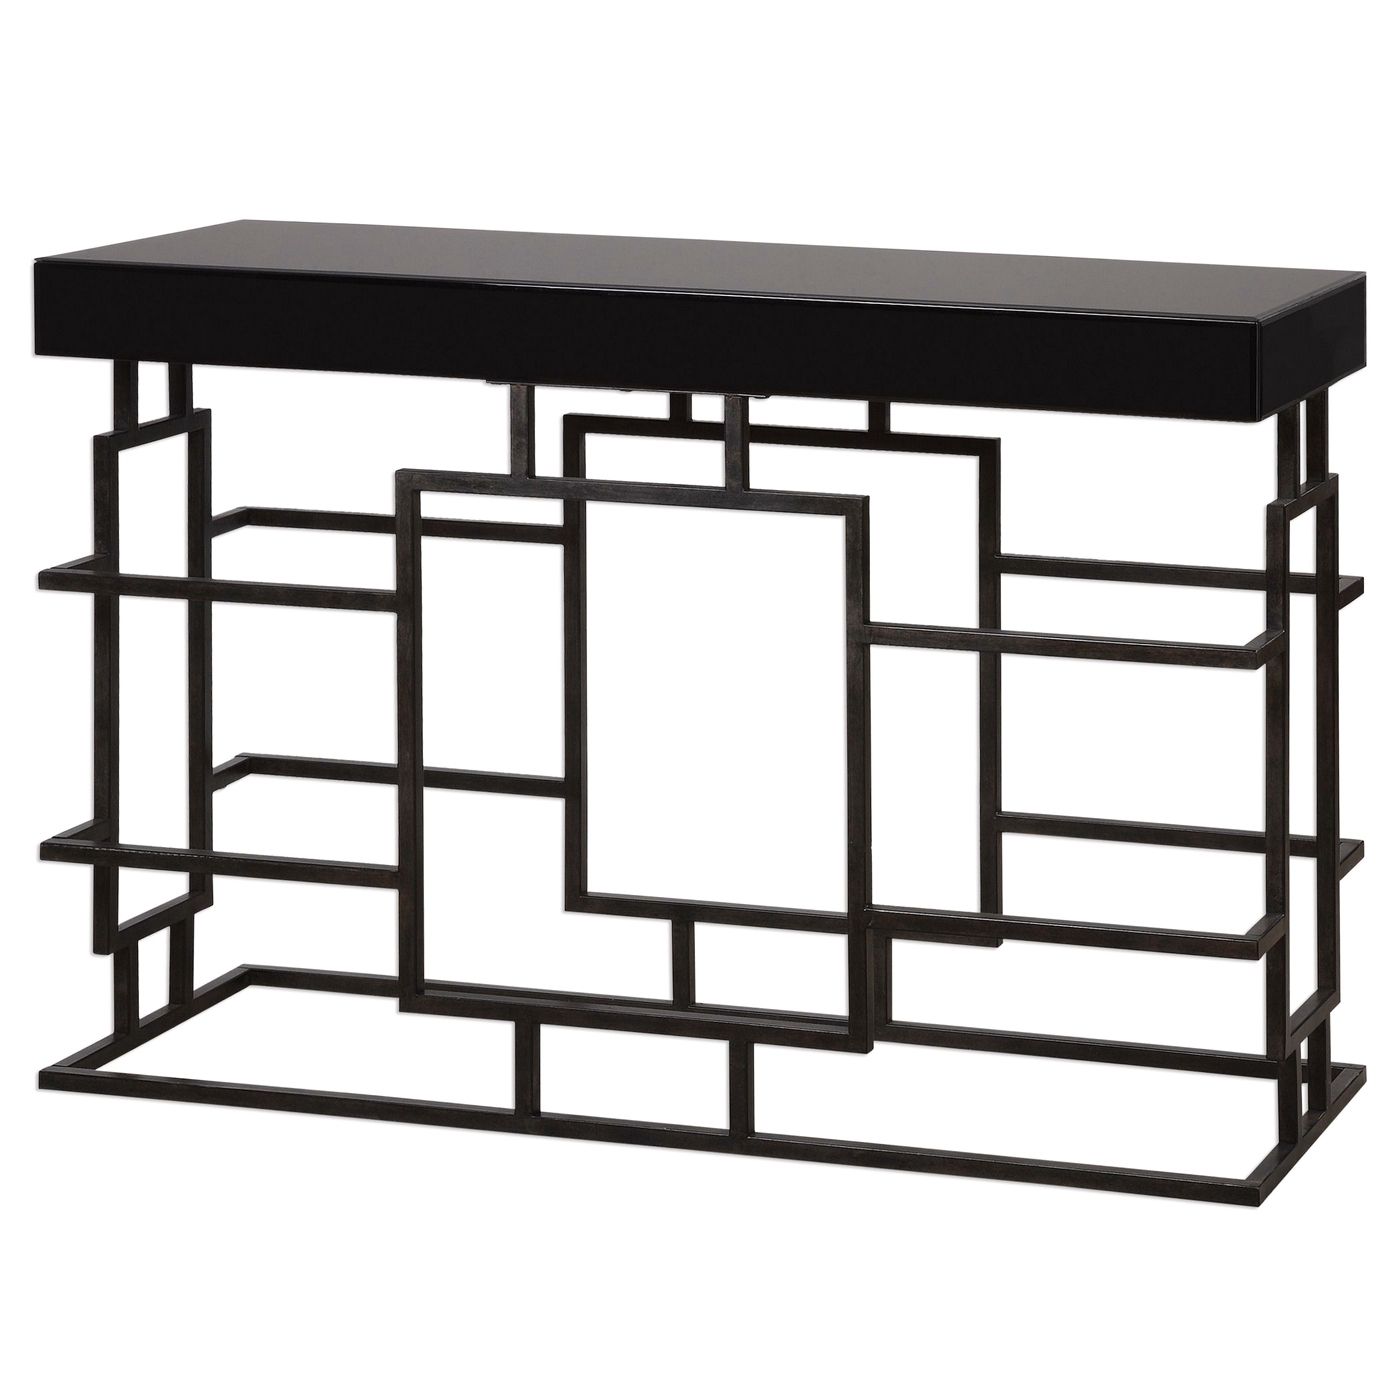 Andy Stylish Black Console Table In Geometric Iron Frame Within Aged Black Iron Console Tables (Photo 14 of 20)